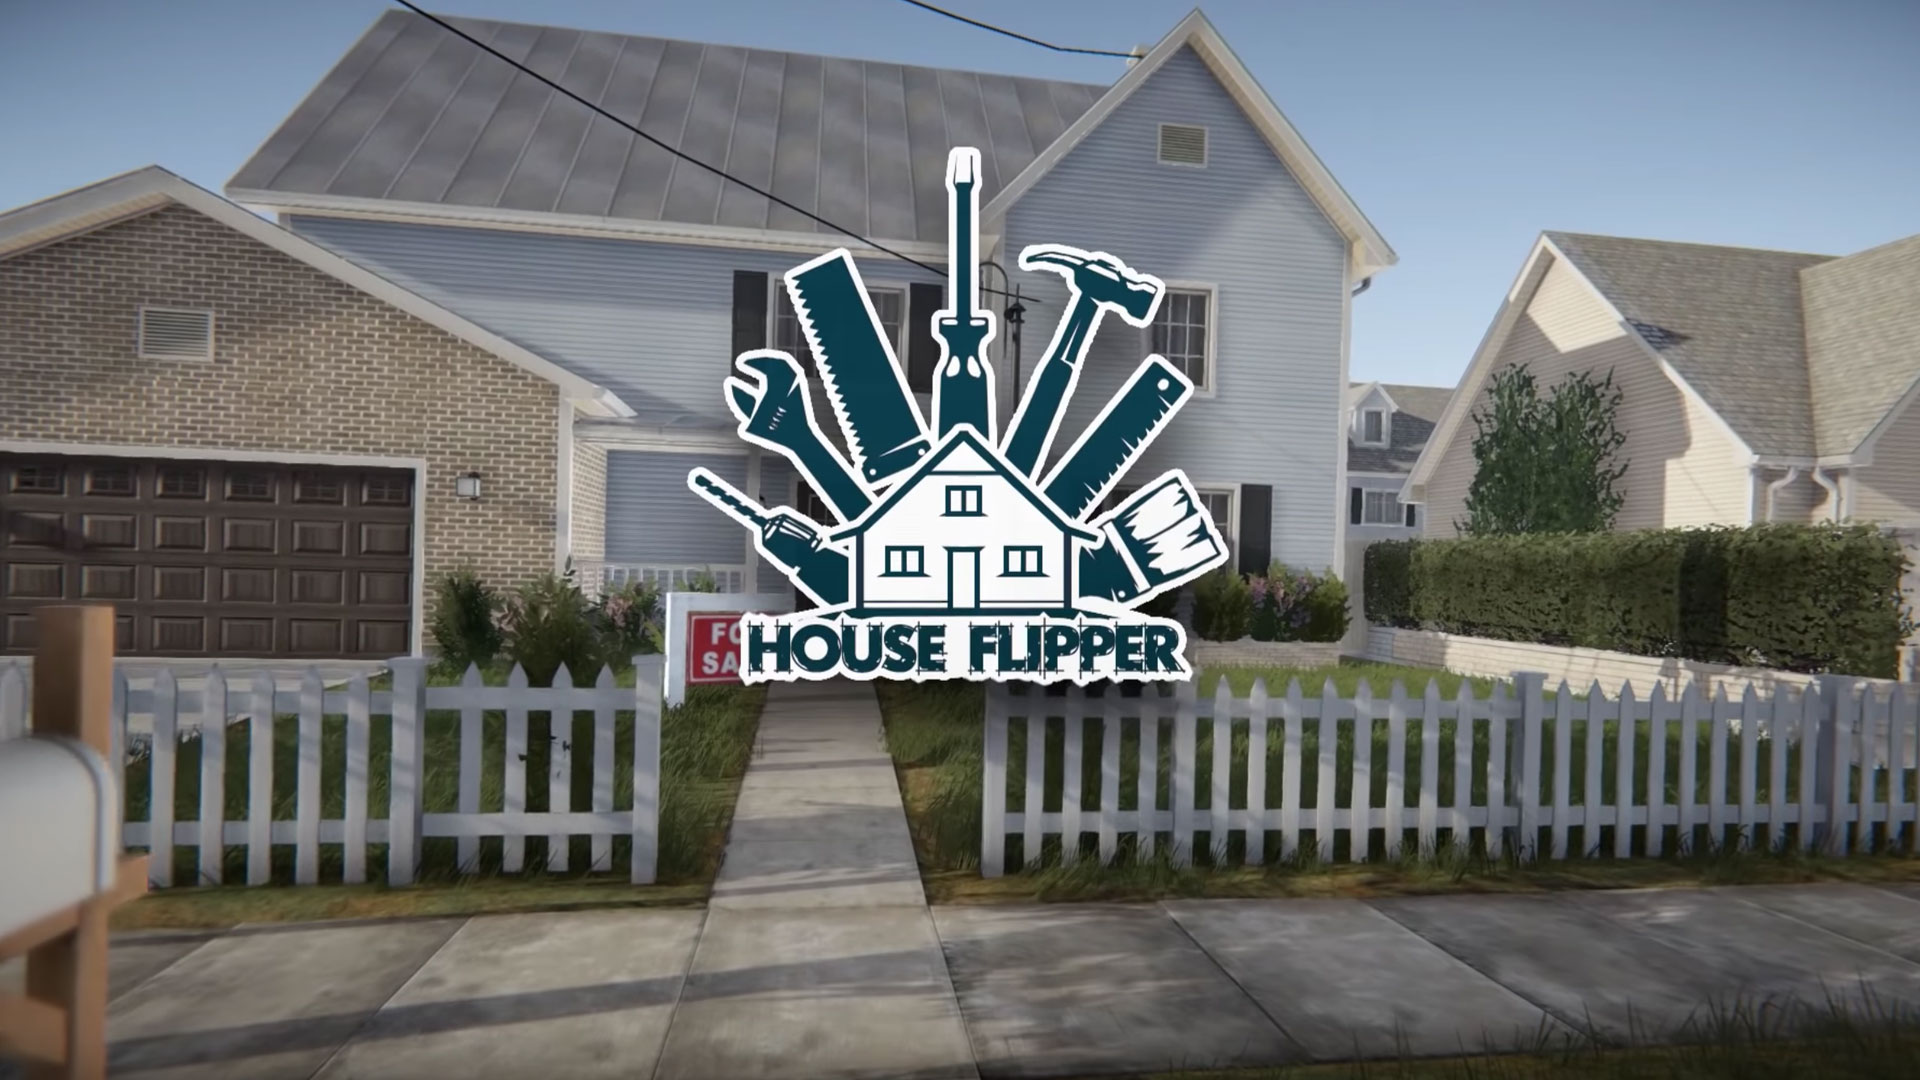 Let’s Play House Flipper